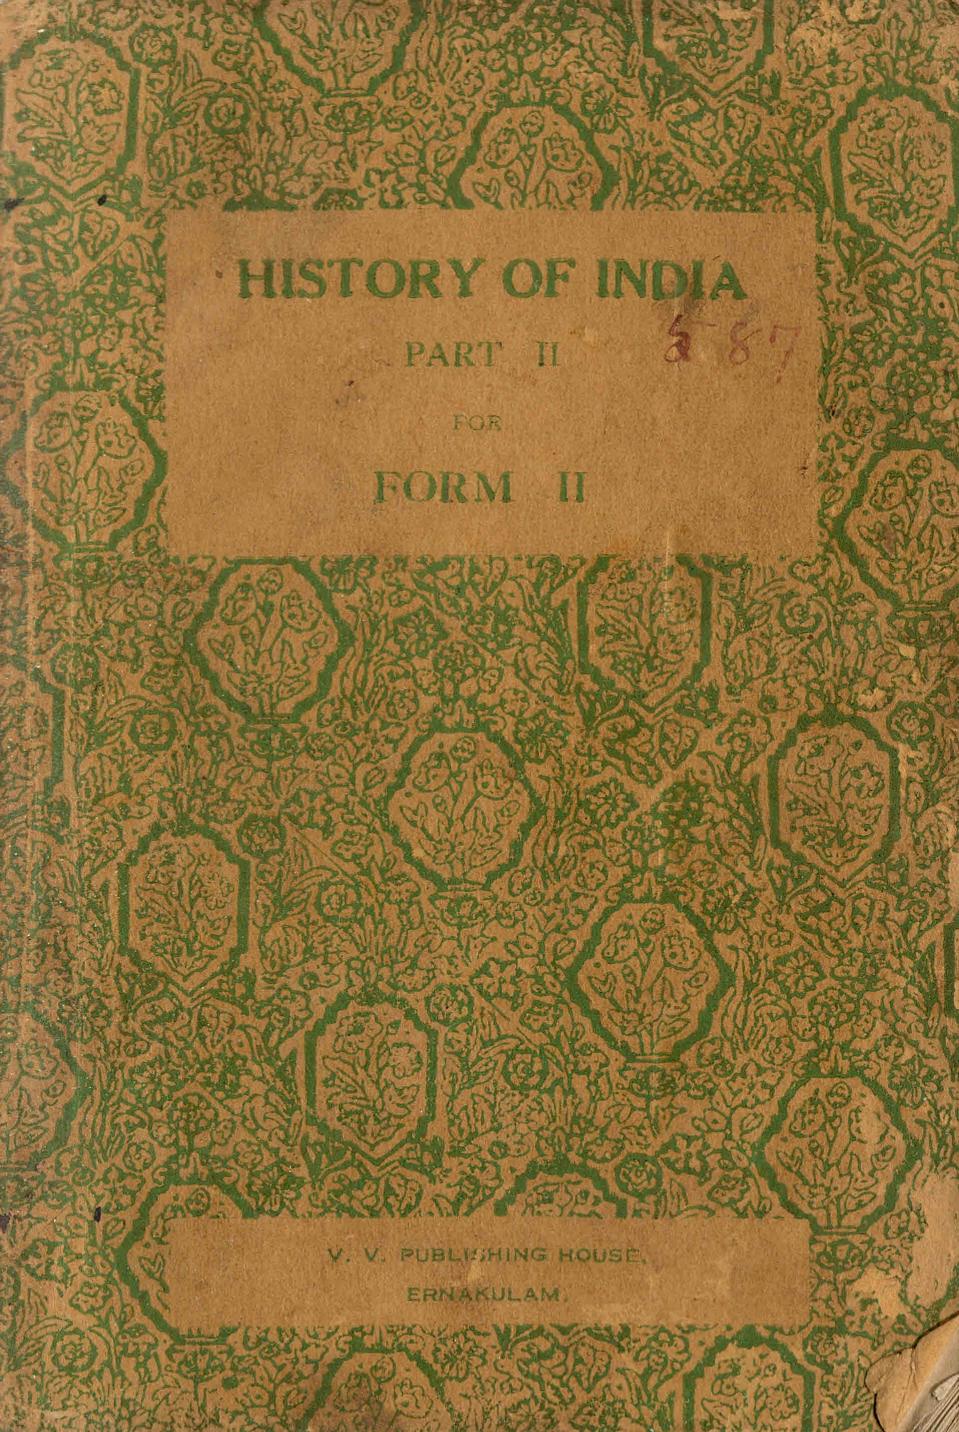  History of India Part 02 for Form 02